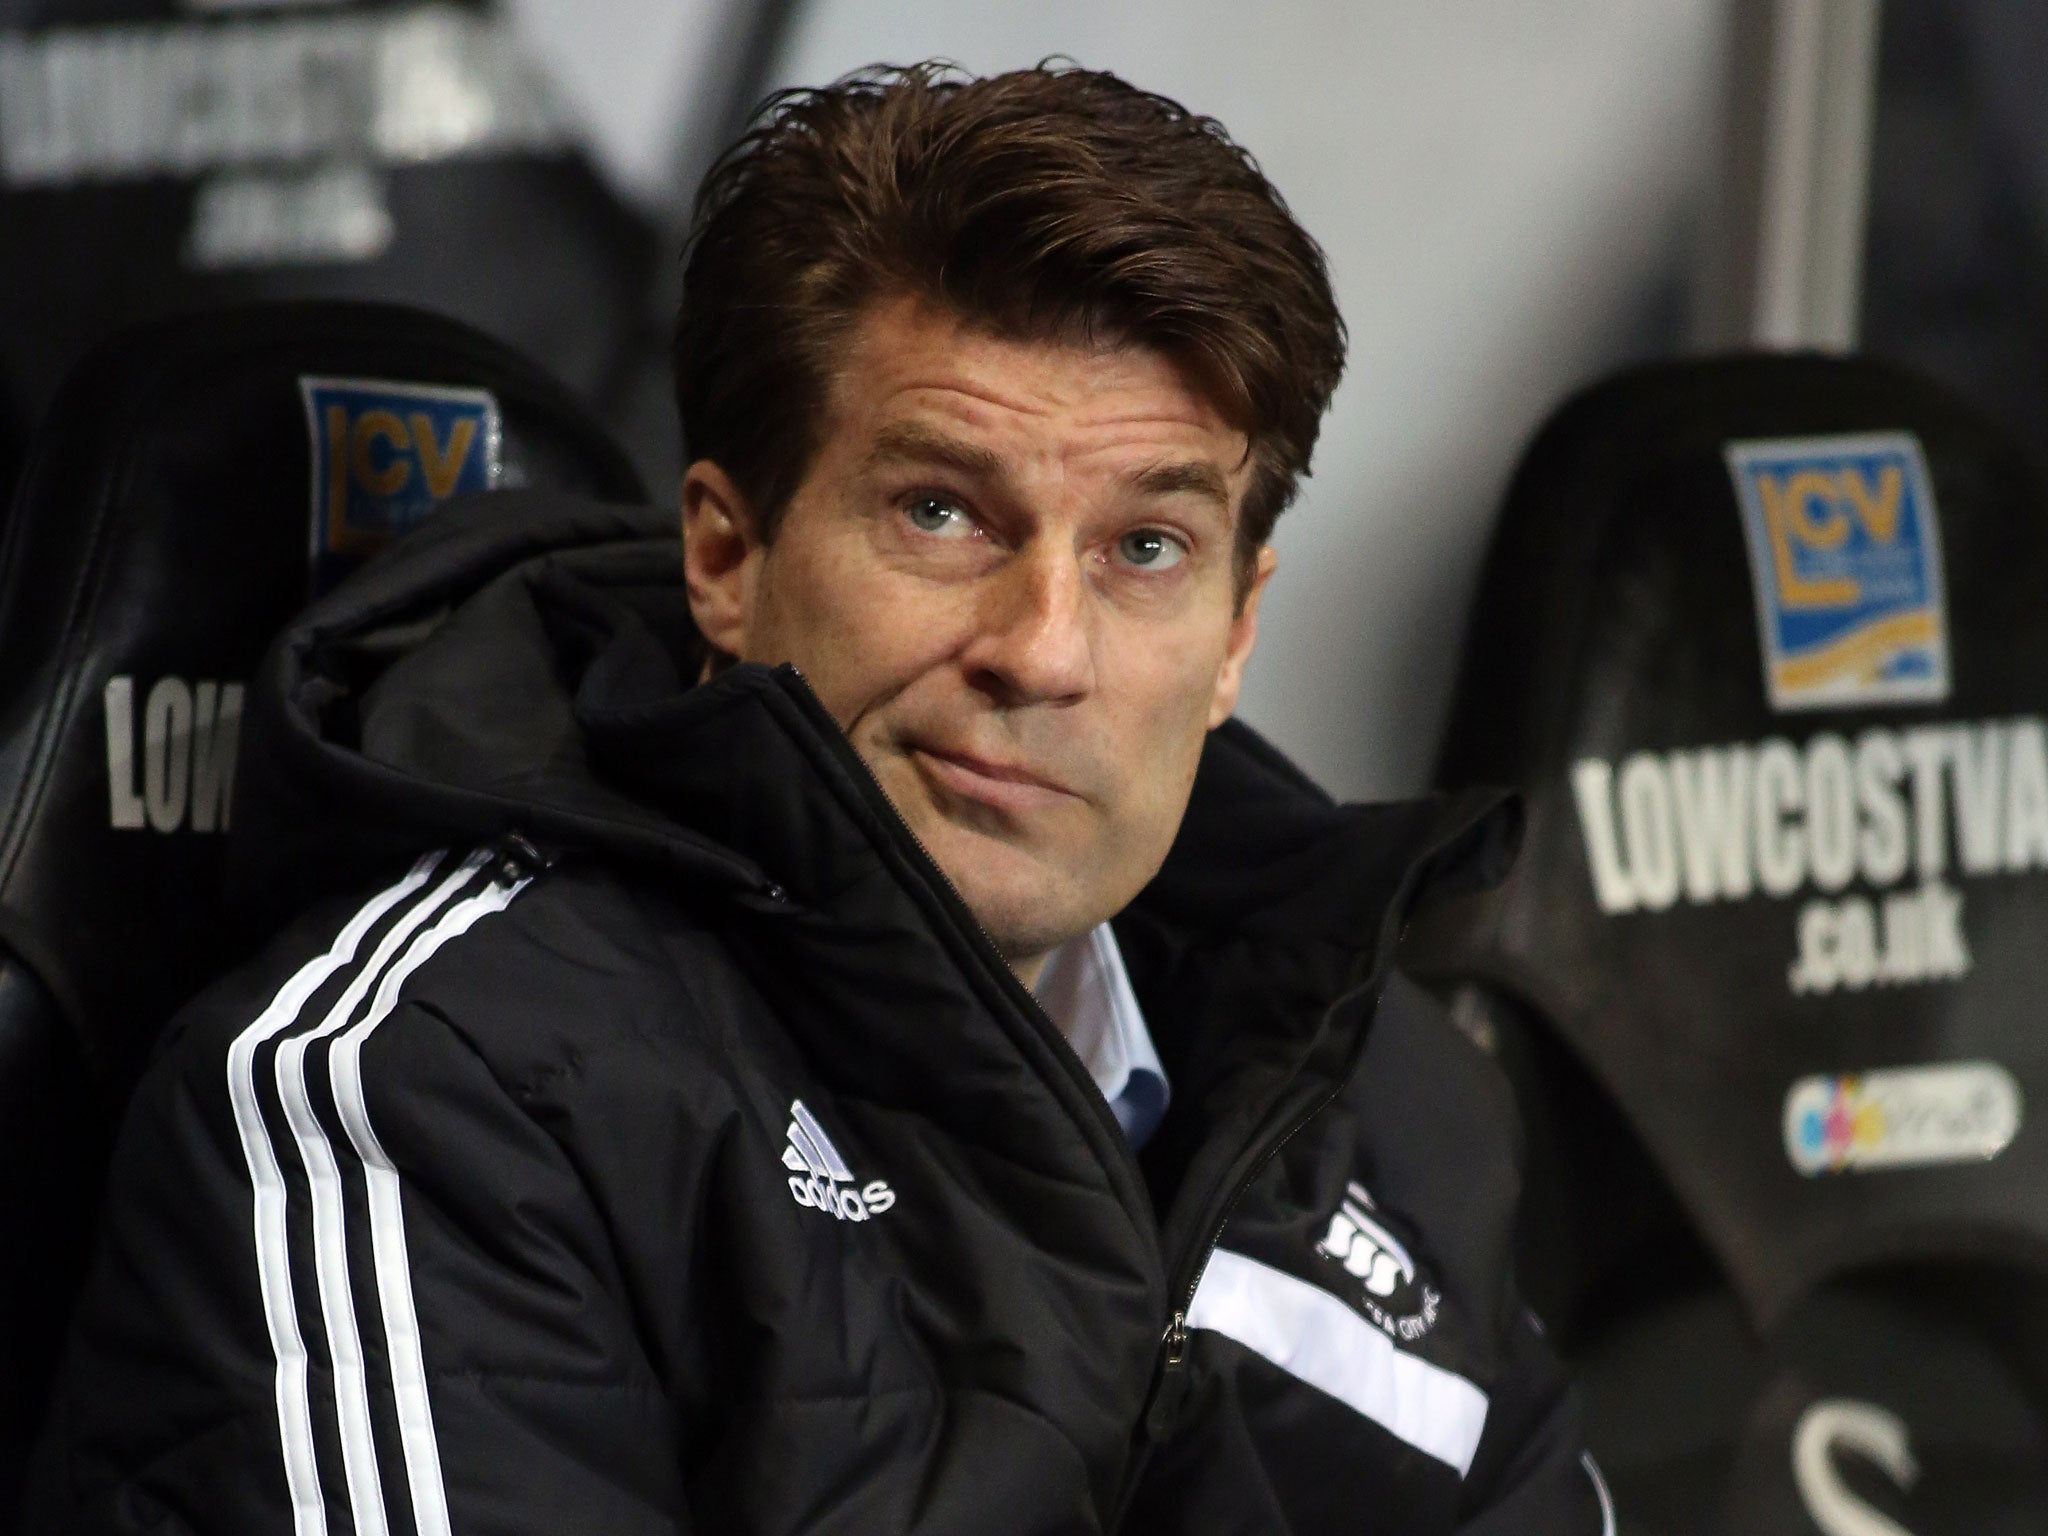 Swansea manager Michael Laudrup looks on from the touchline